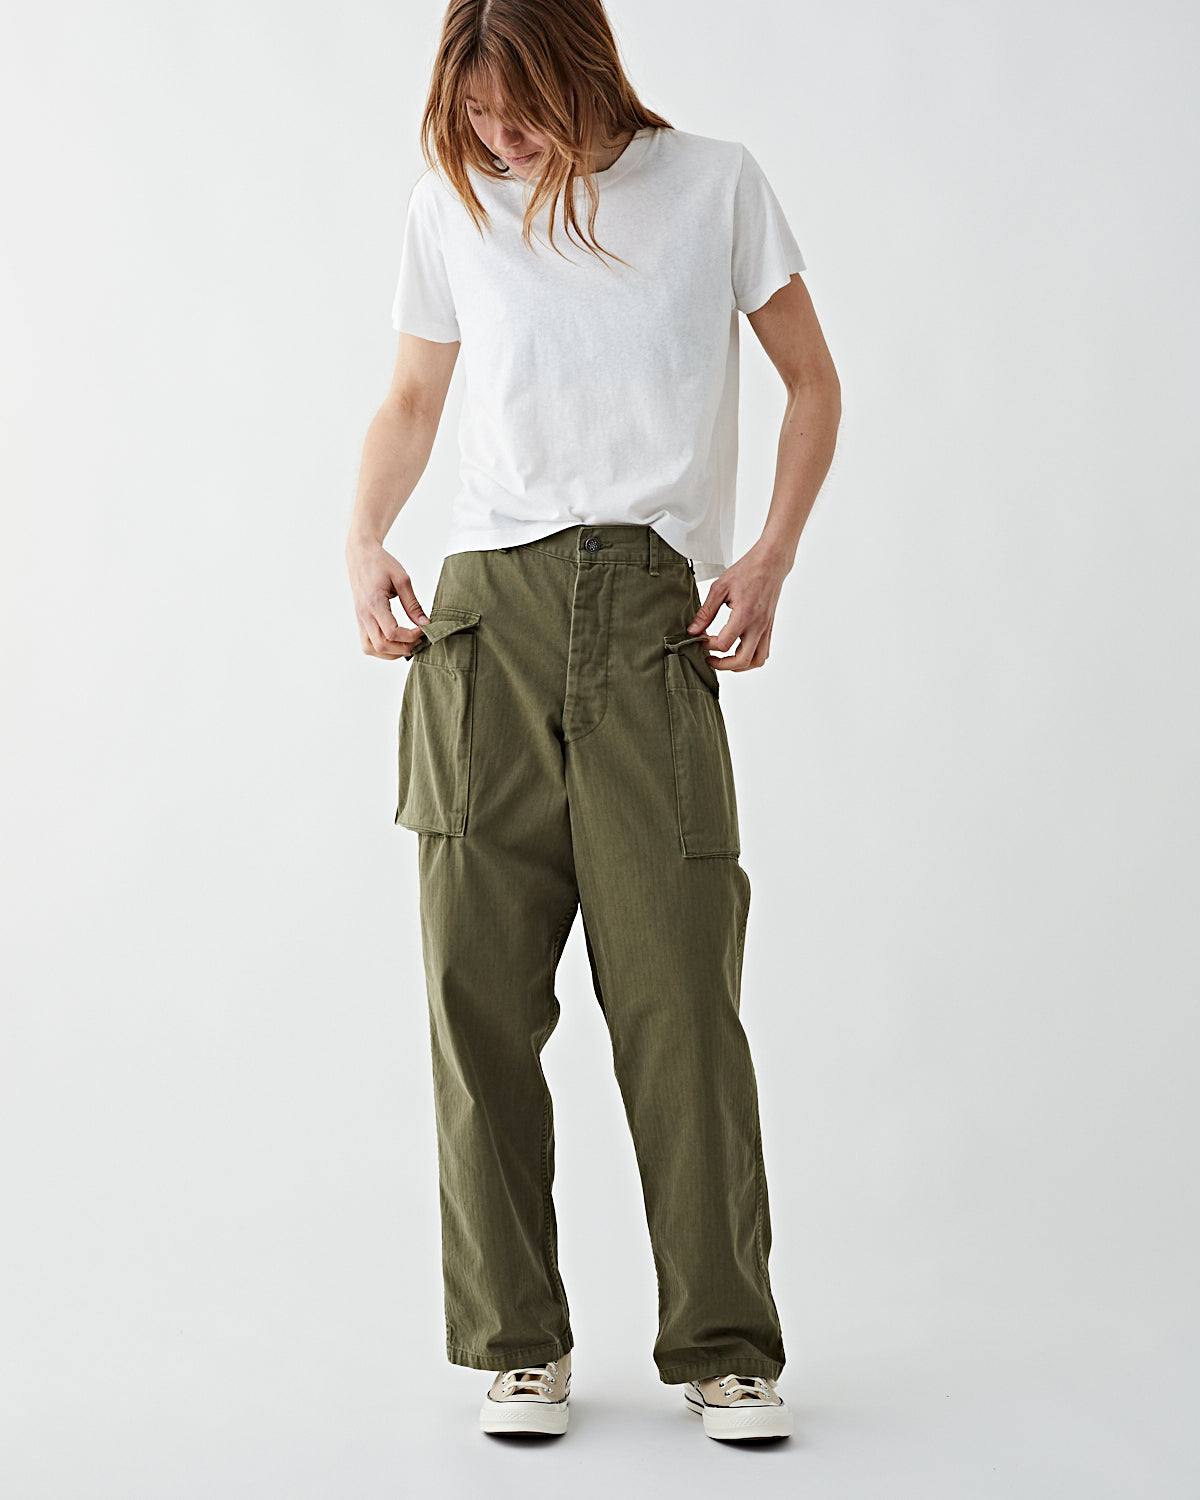 Buy Army pants In Pakistan Army pants Price